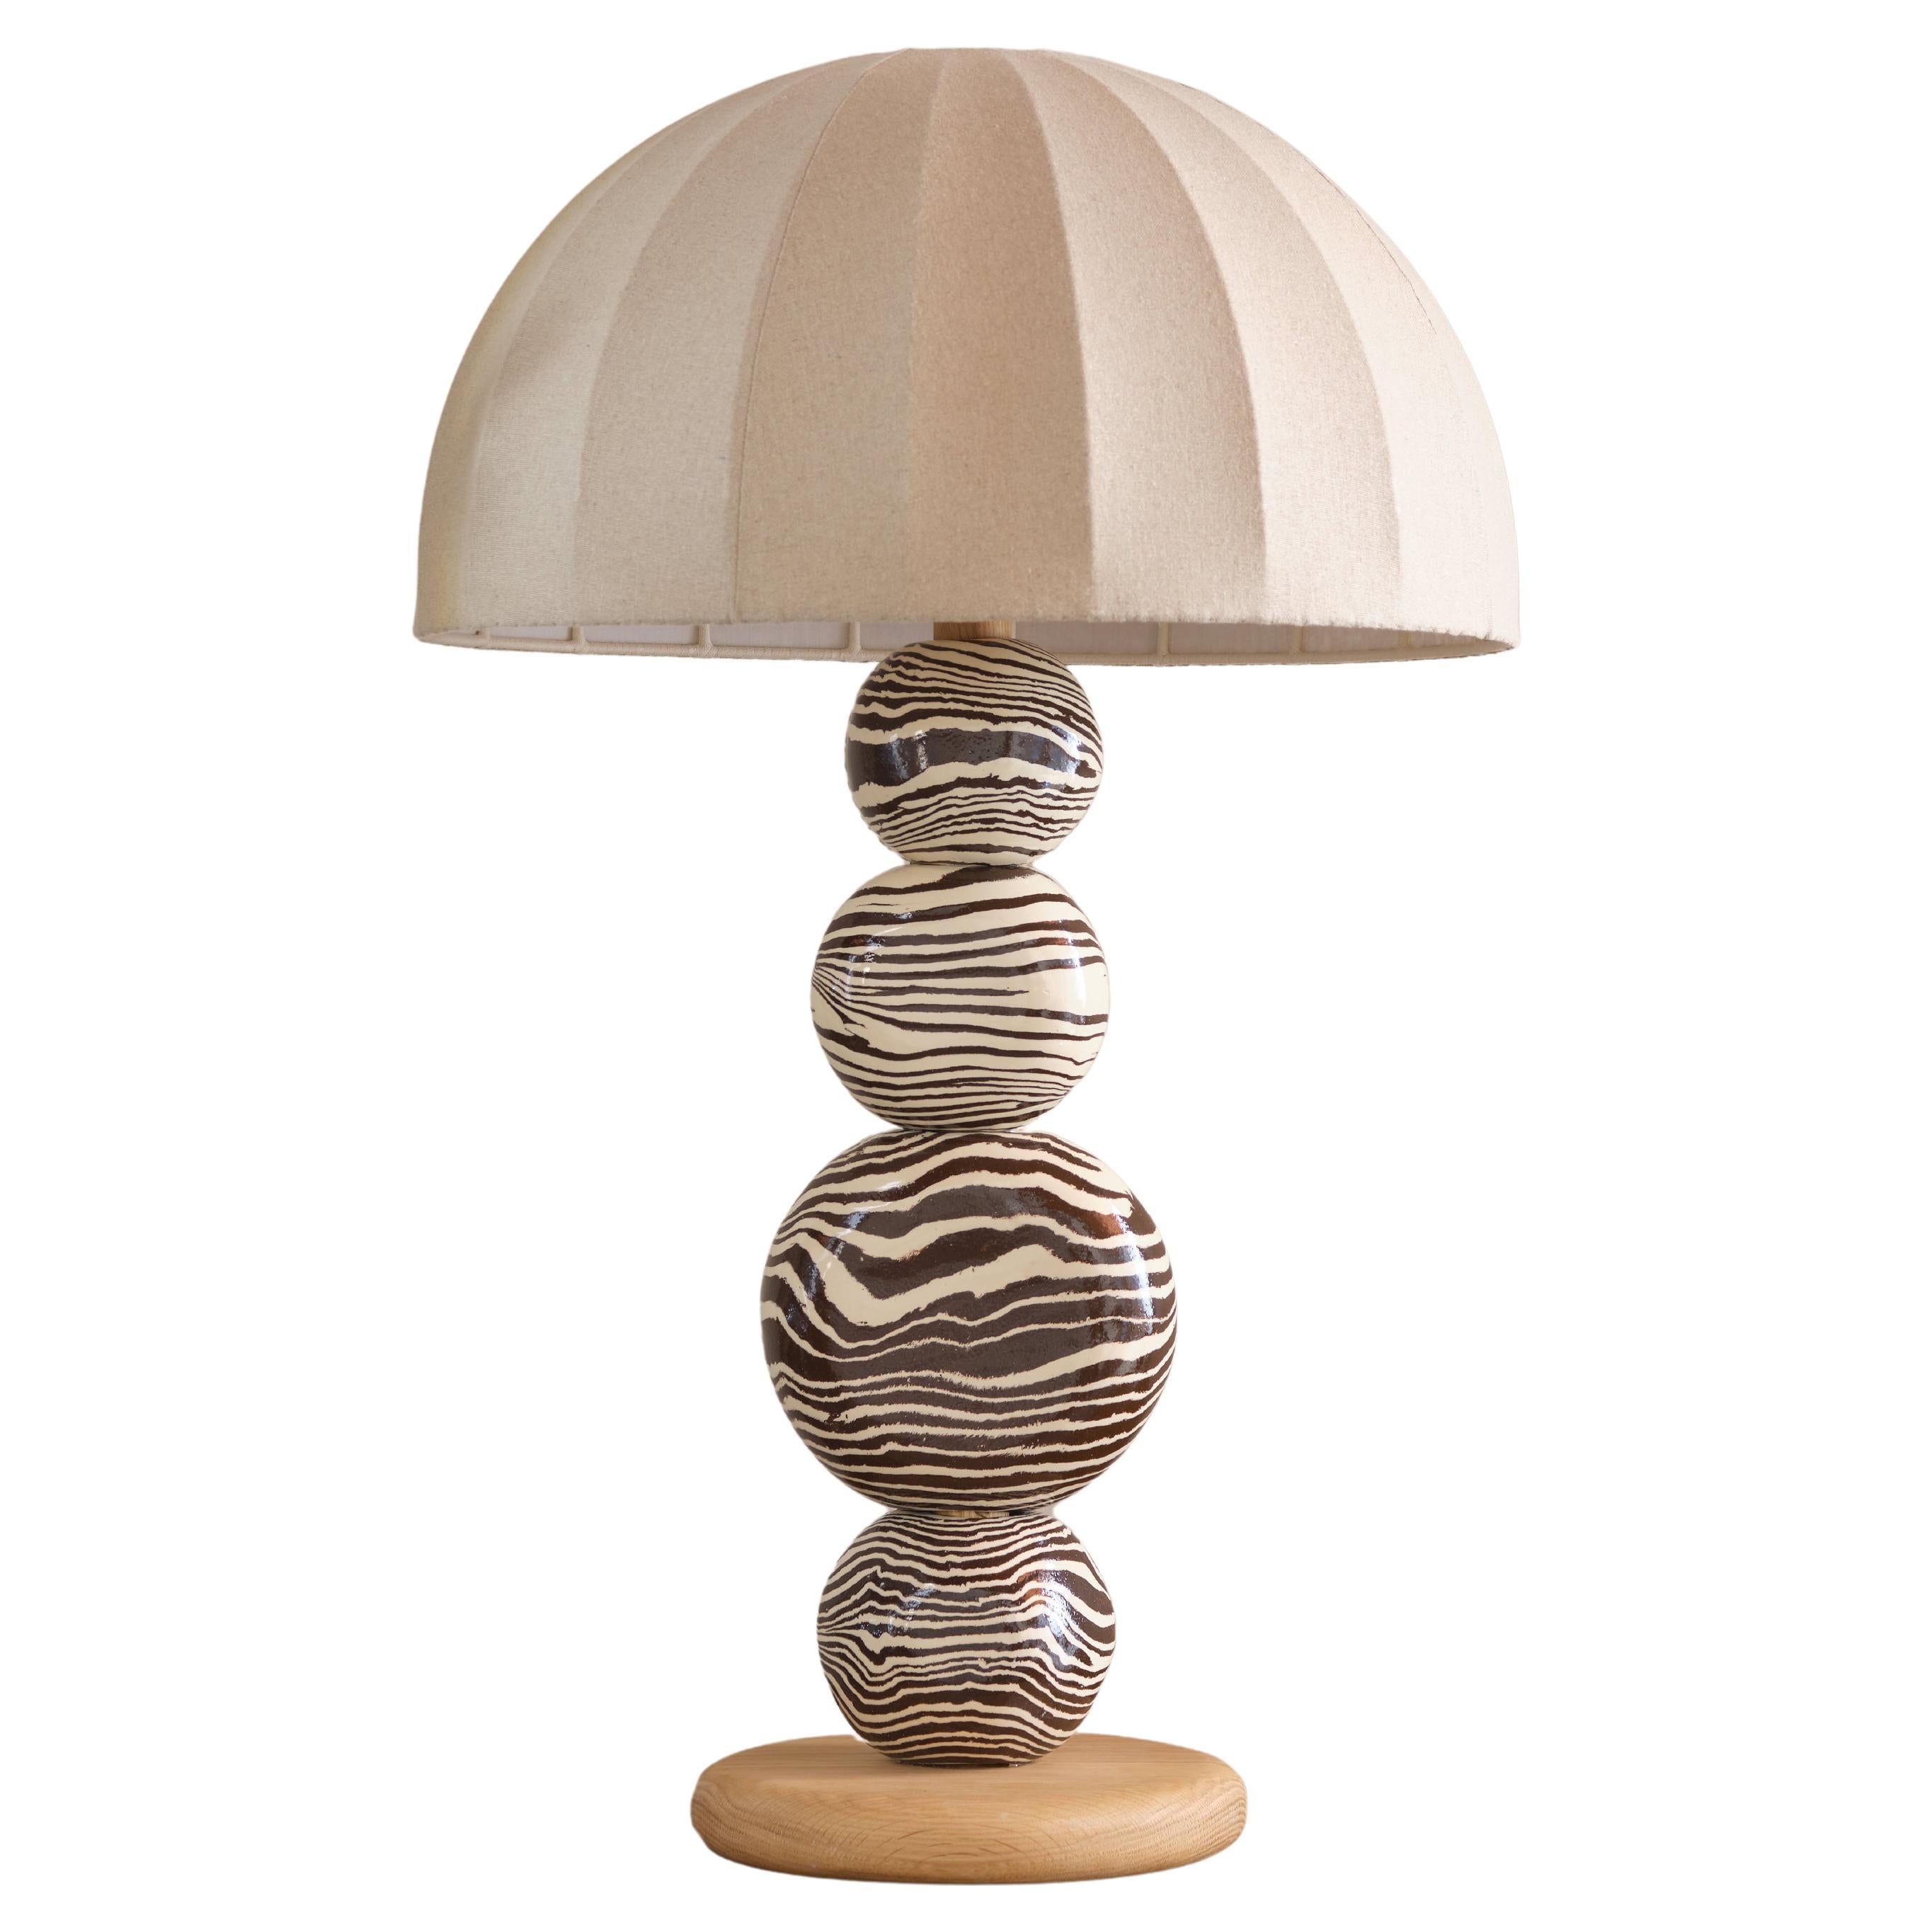 Henry Holland Studio Handmade Brown and White Ceramic Sphere Table Lamp For Sale